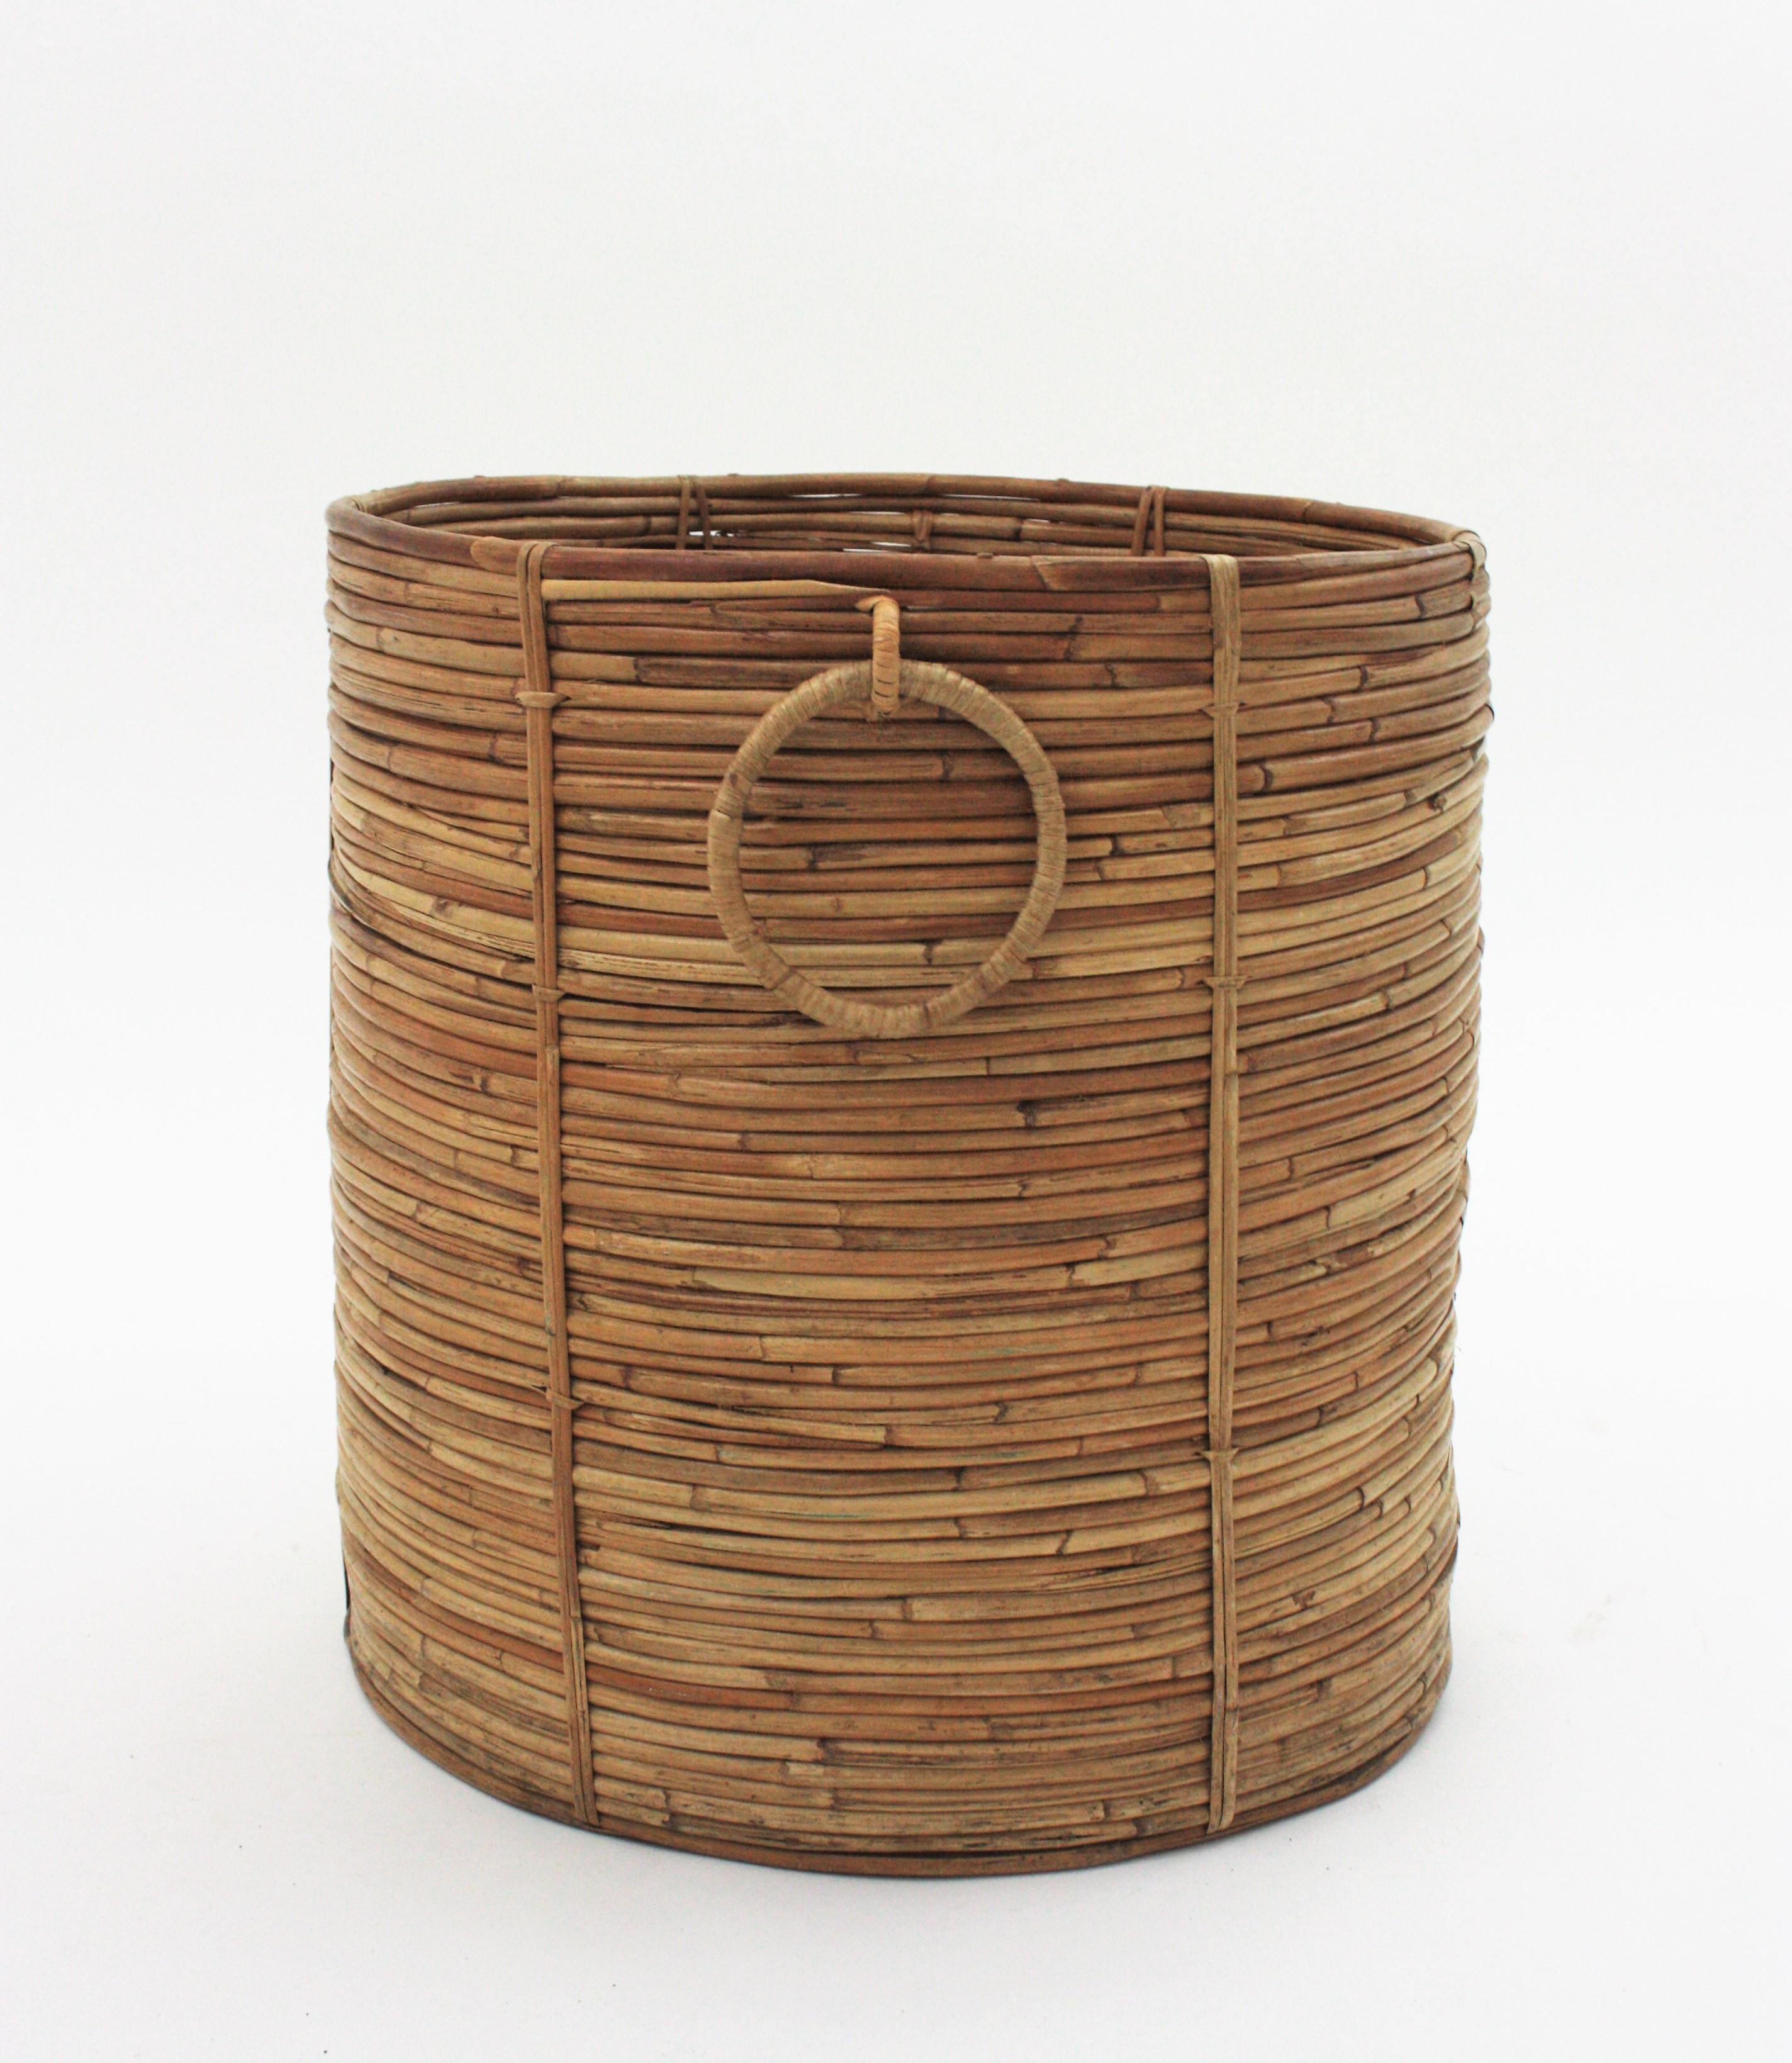 Wicker Pair of Rattan Large Round Planters or Baskets with Ring Handles, 1970s